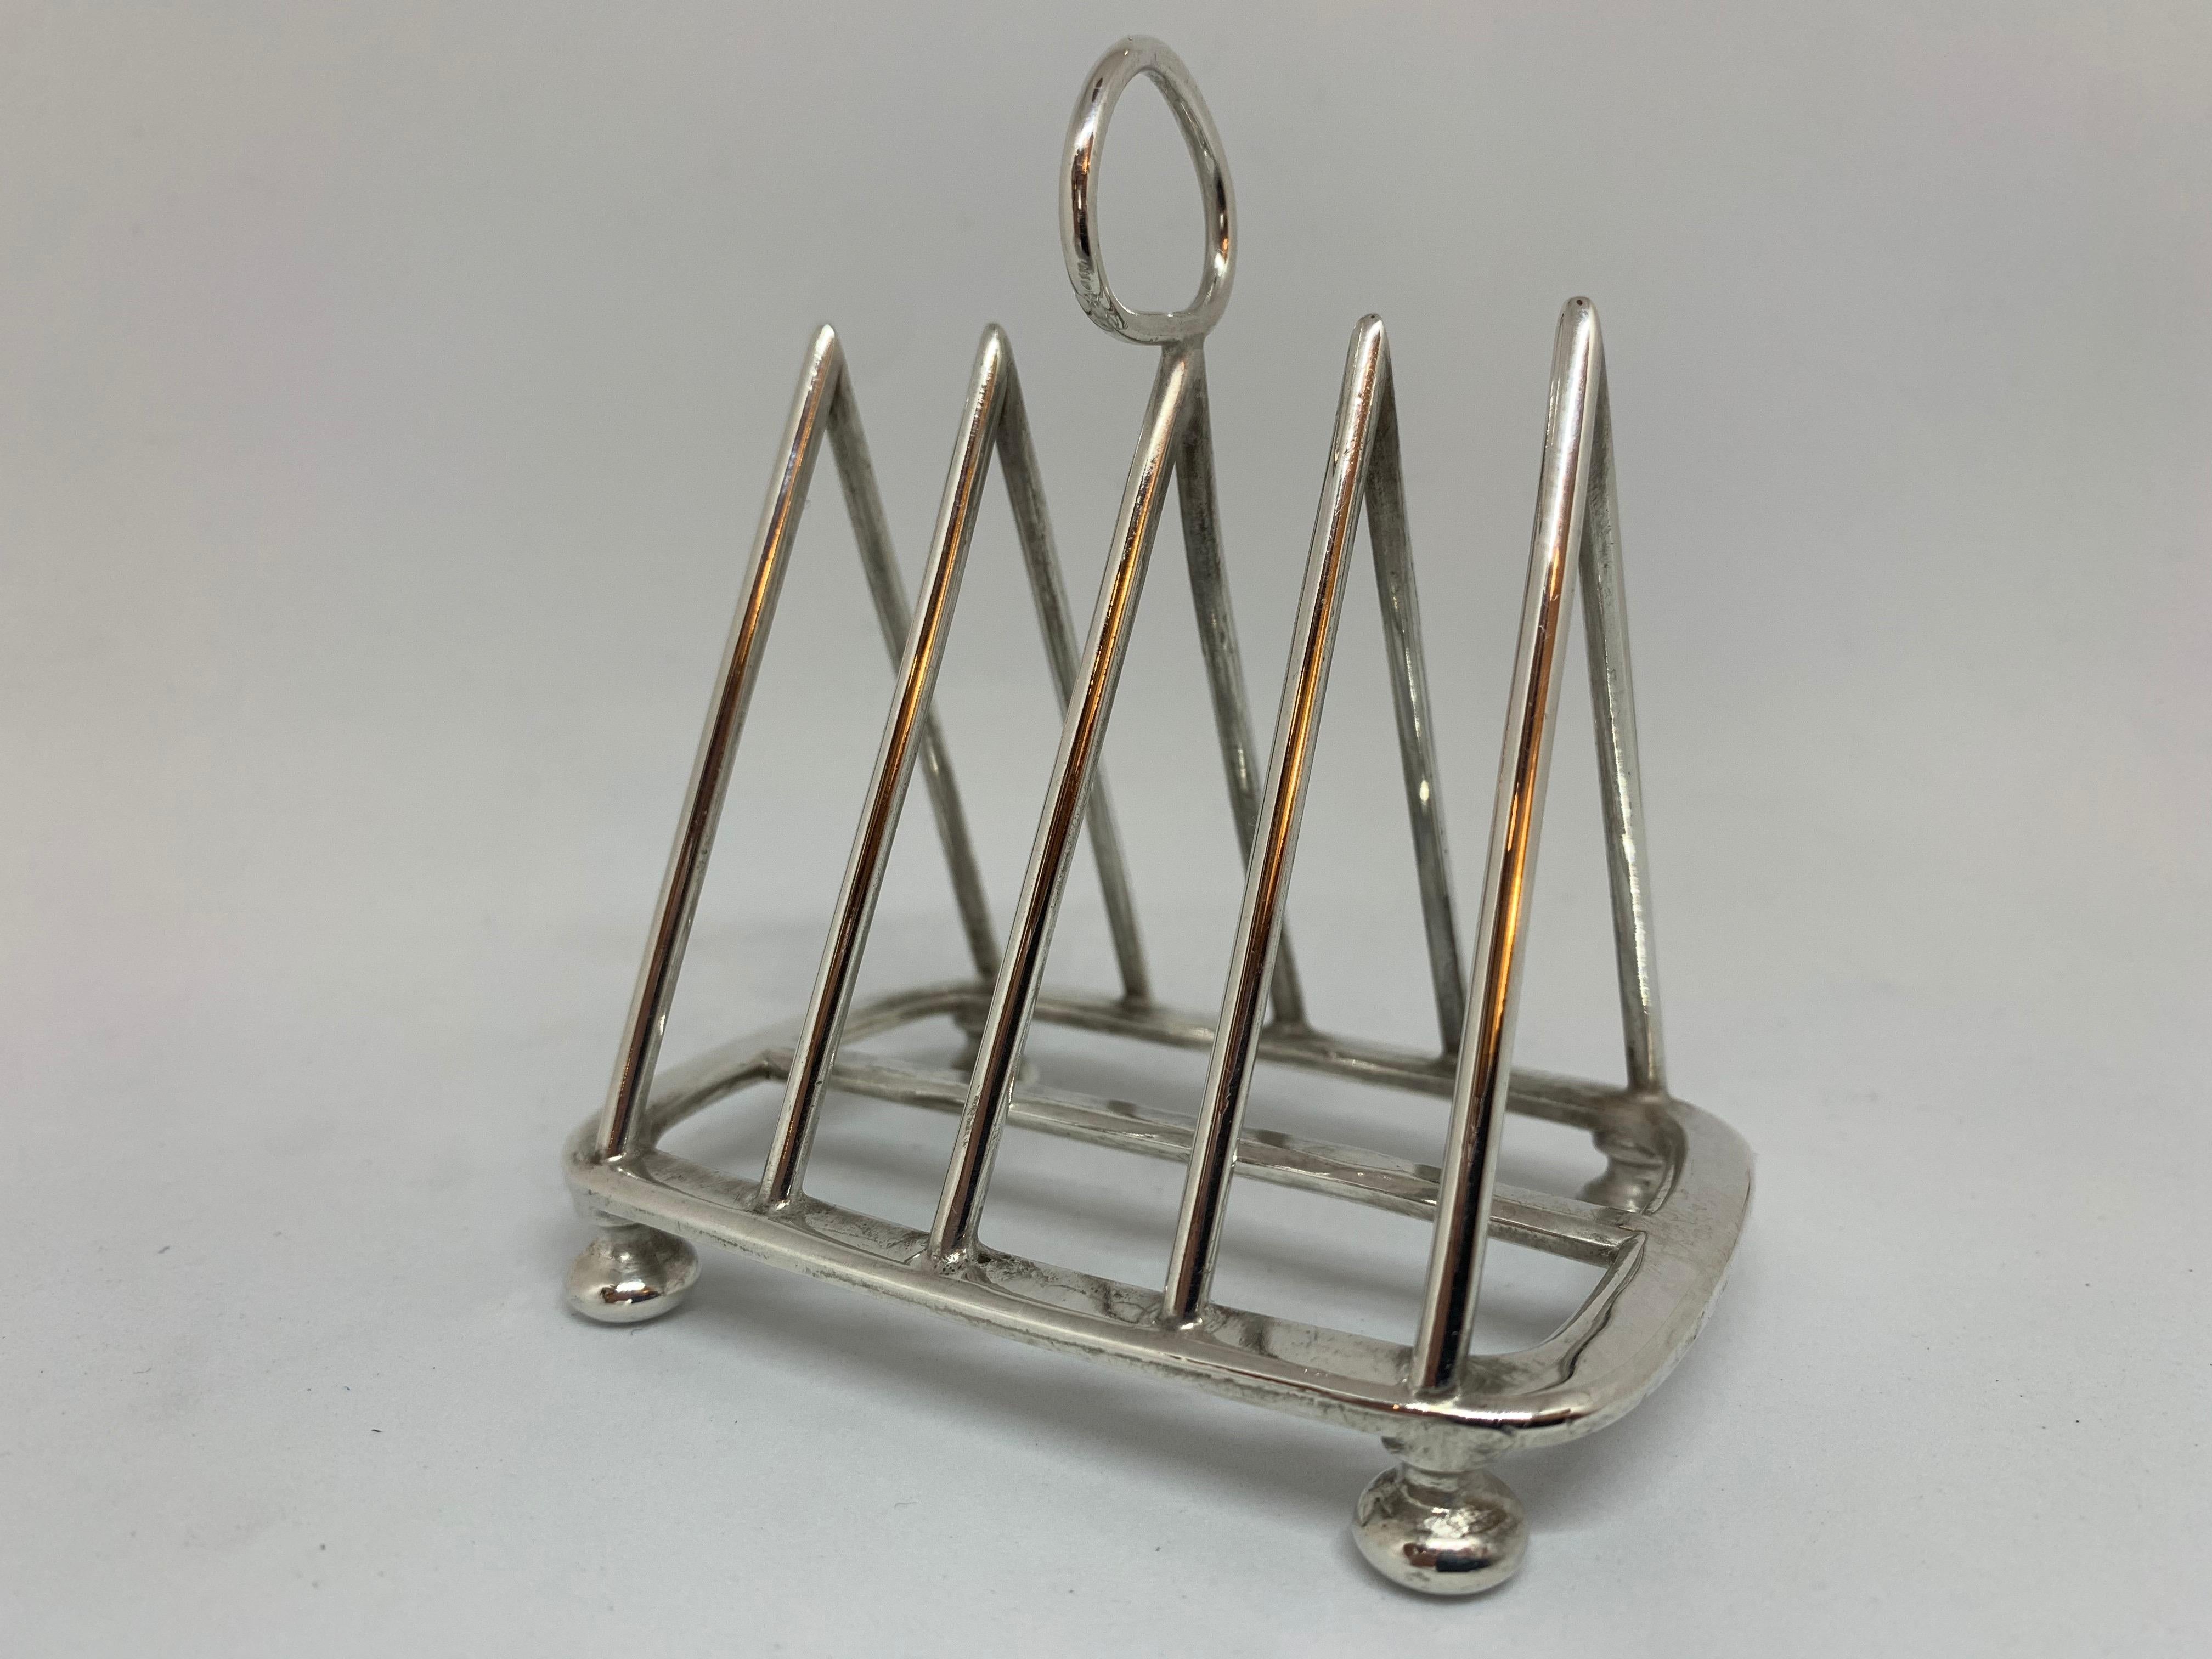 An English silver plate toast rack in a triangular pyramid shape divided into four sections with room for four slices of toast, circa 1900. Made in Sheffield by Walker & Hall. Hallmarked on the base.

Measres: H 9 1/2 cm, D 6 cm, W 9cm.